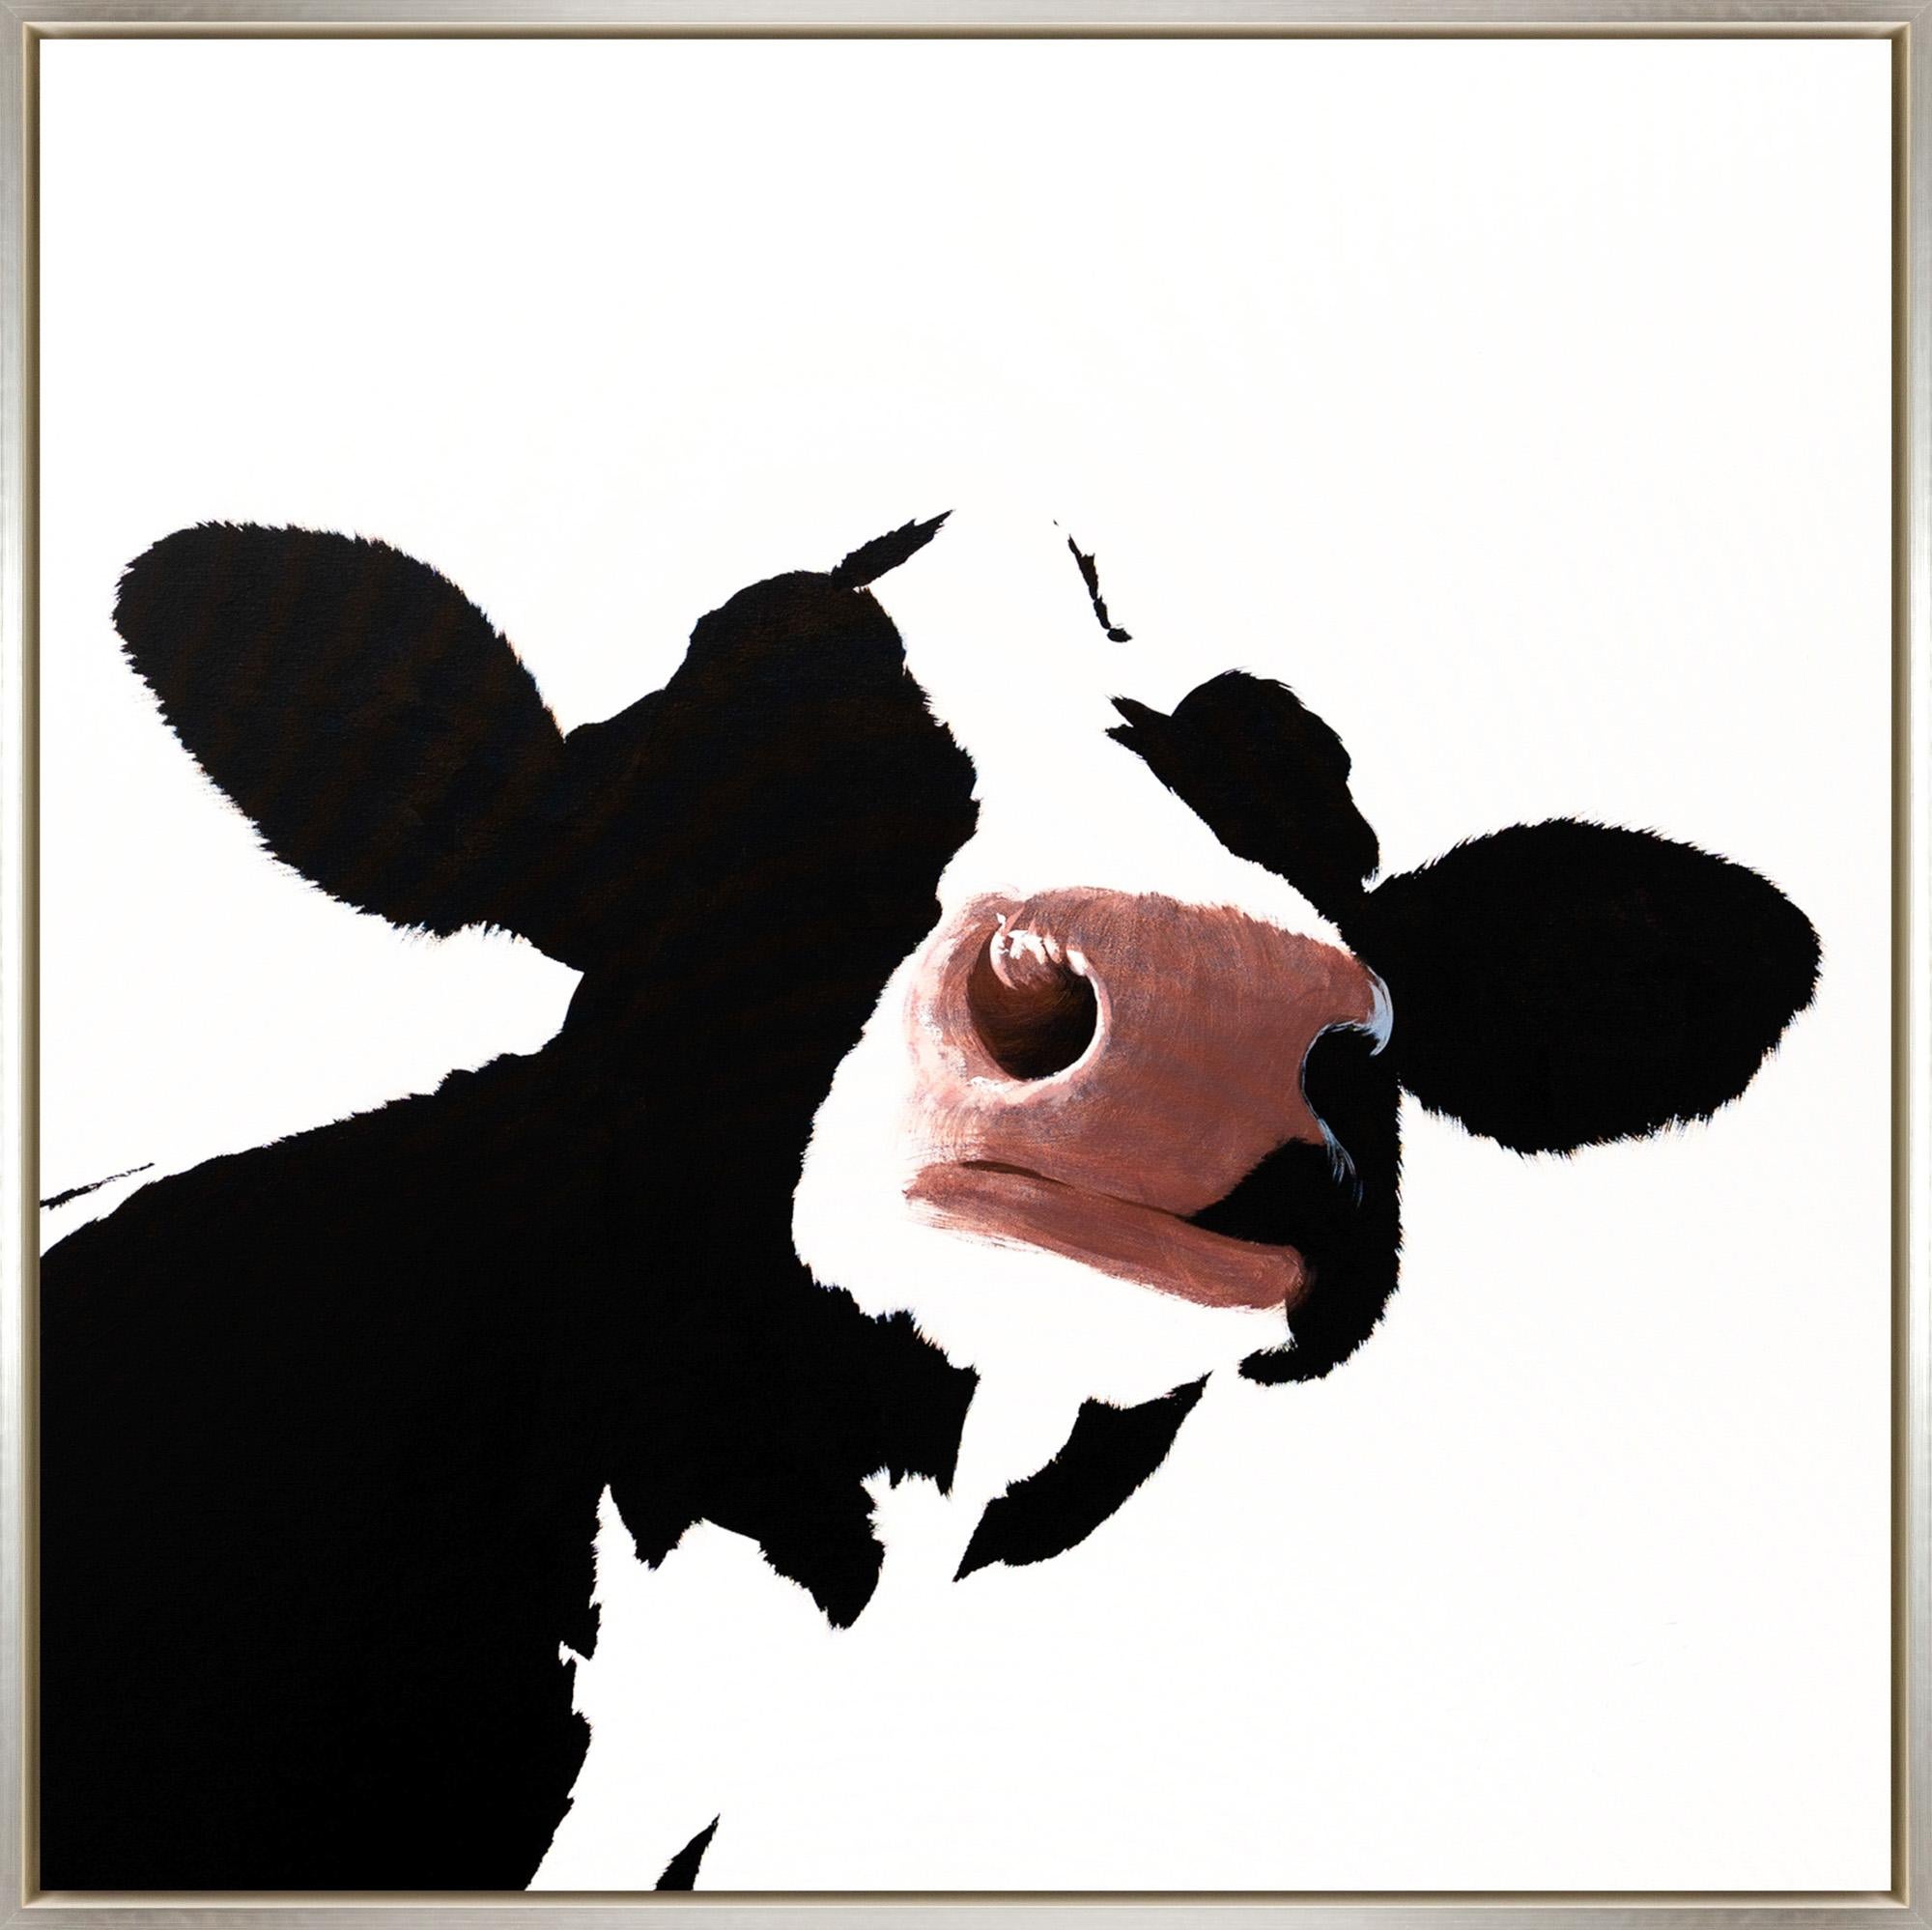 Joshua Brown Animal Painting - "Nearly Camouflaged Cow III" Contemporary Animal Portrait Acrylic on Canvas